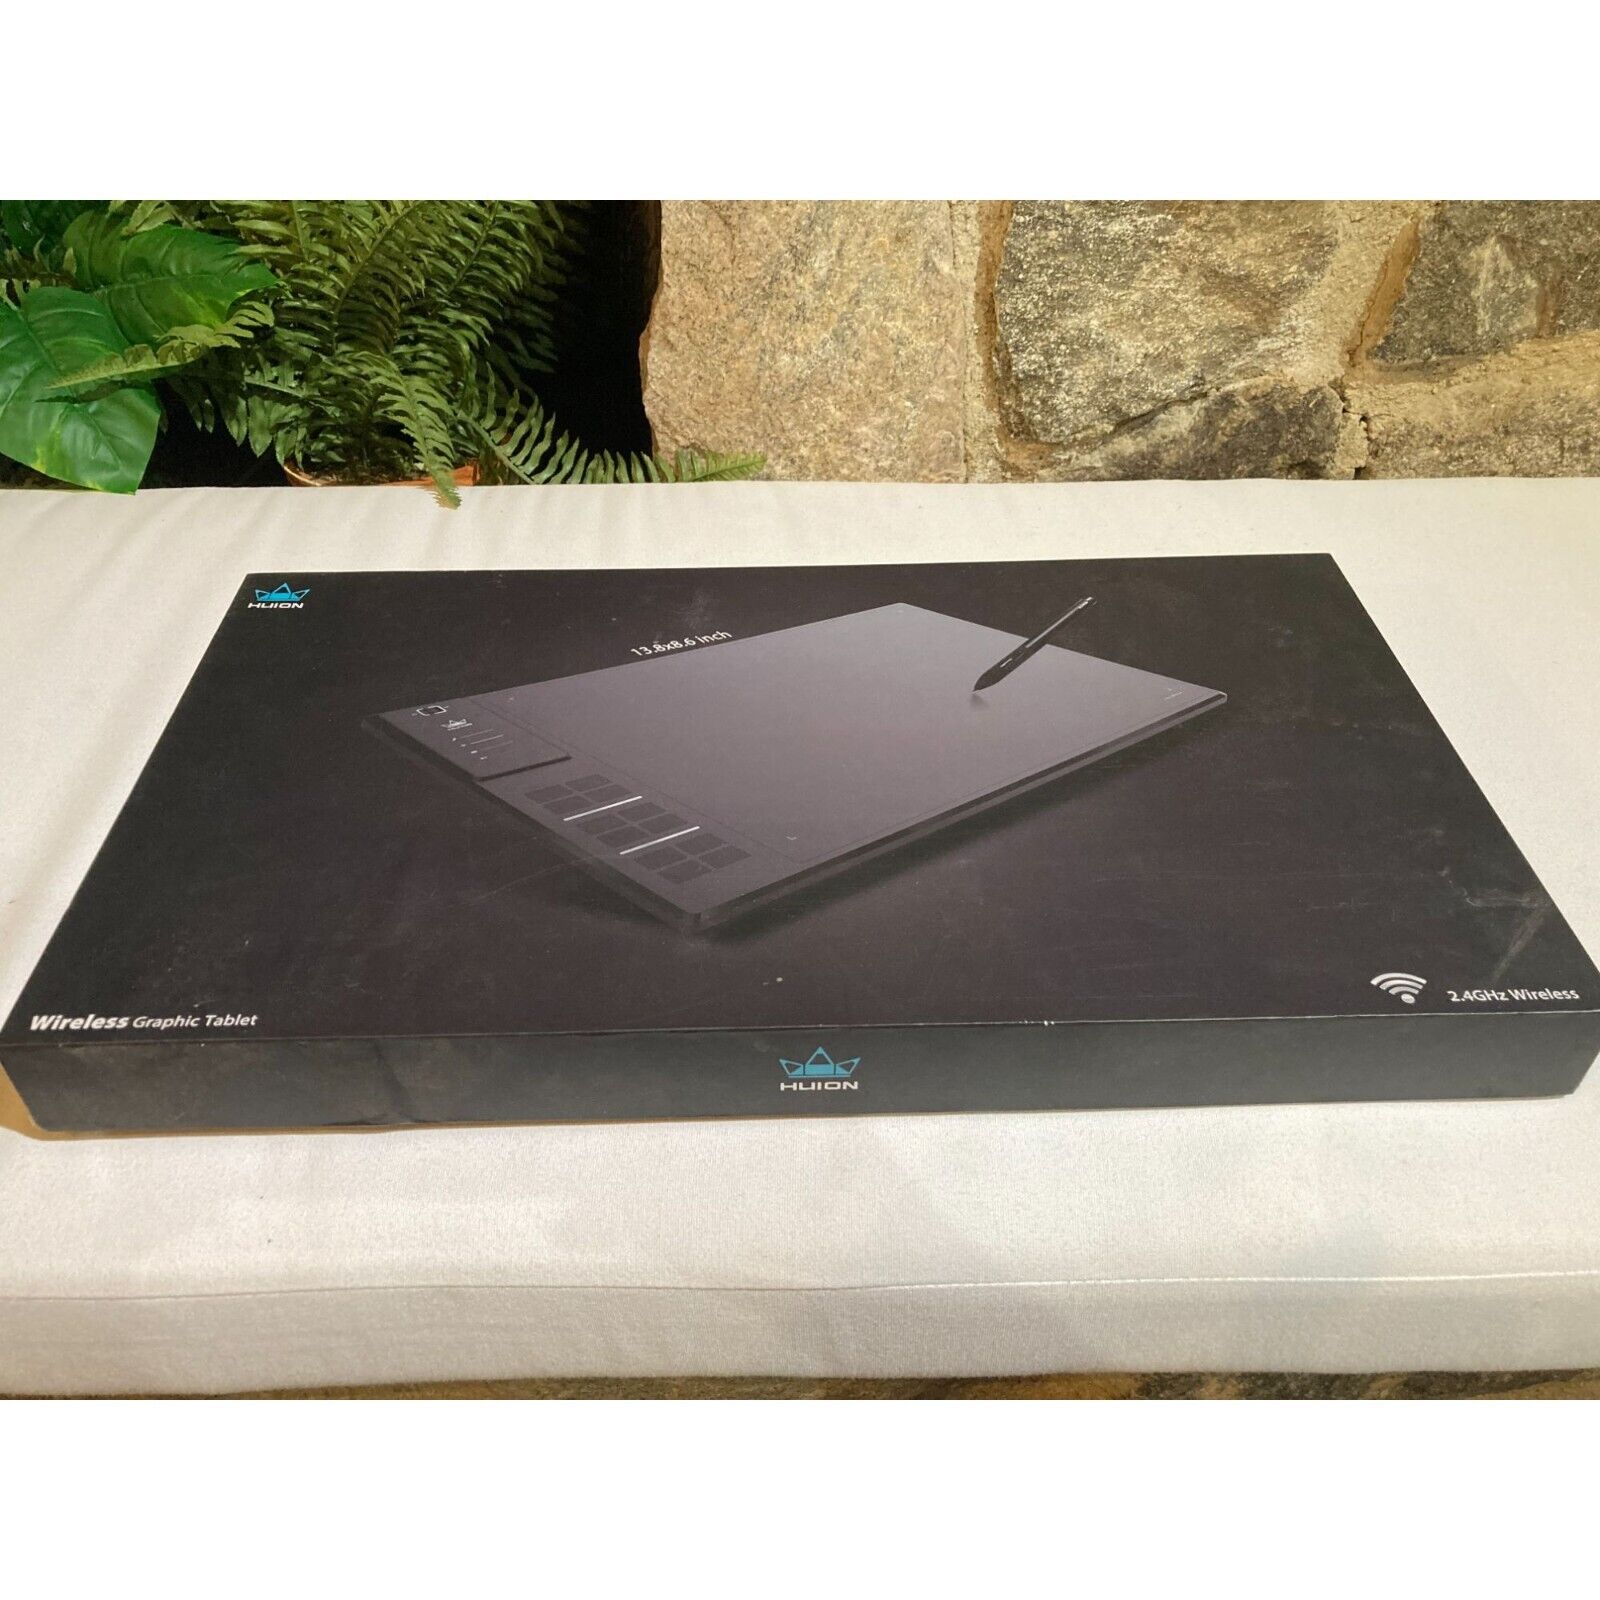 Huion WH1409 Professional Graphics Tablet - Pre-Owned - Missing Stylus